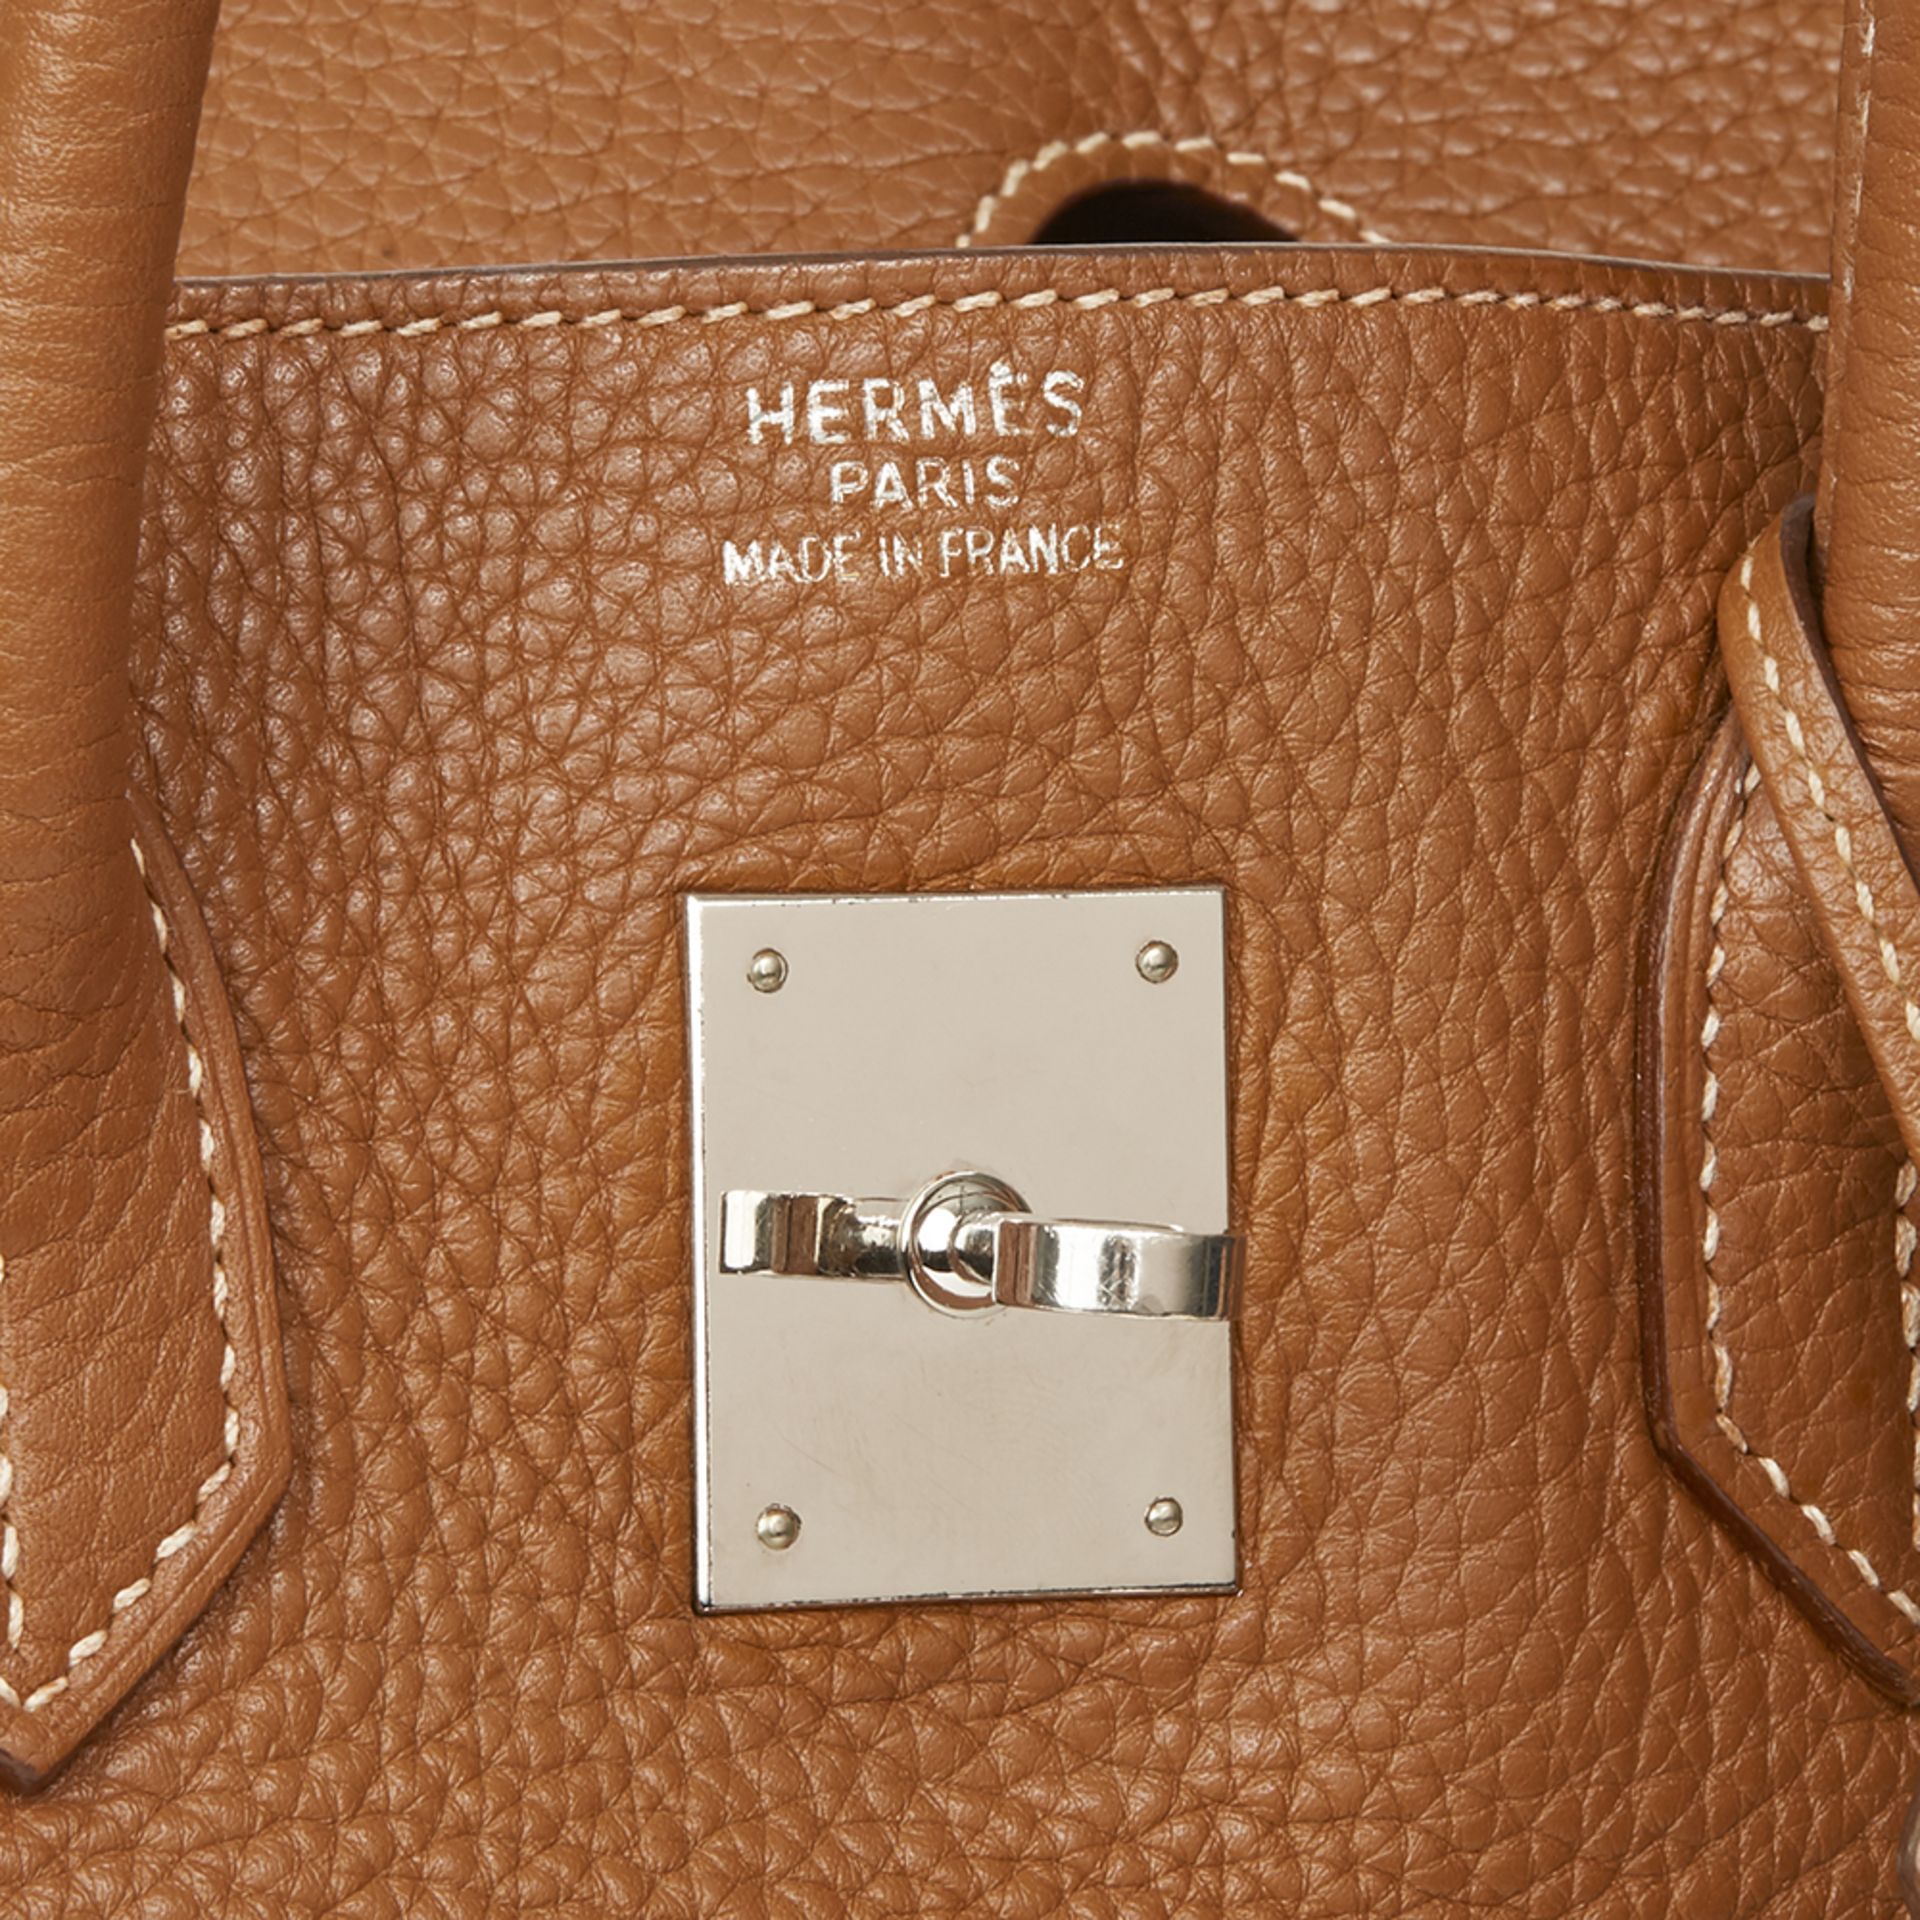 Hermés Gold Clemence Leather Birkin 35cm - Image 8 of 13